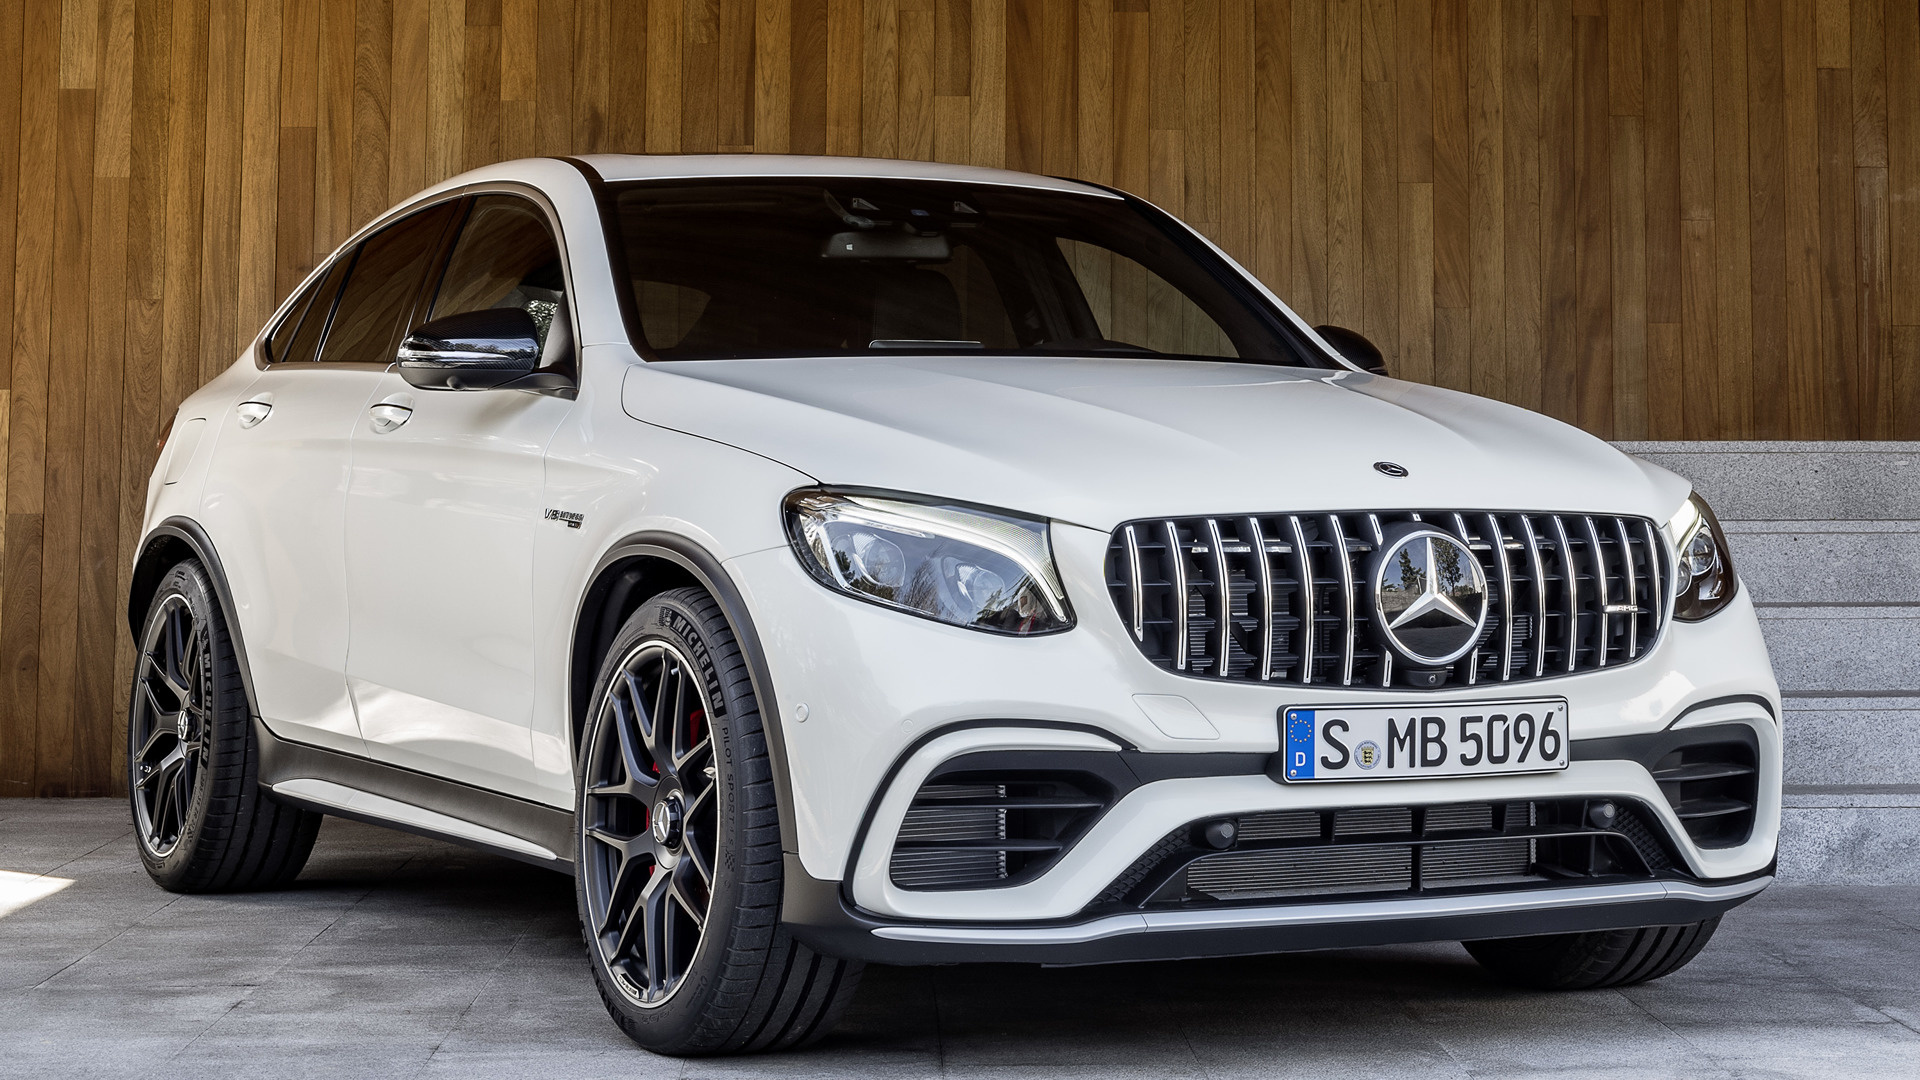 2017 Mercedes-AMG GLC 63 S Coupe - Wallpapers and HD Images | Car Pixel